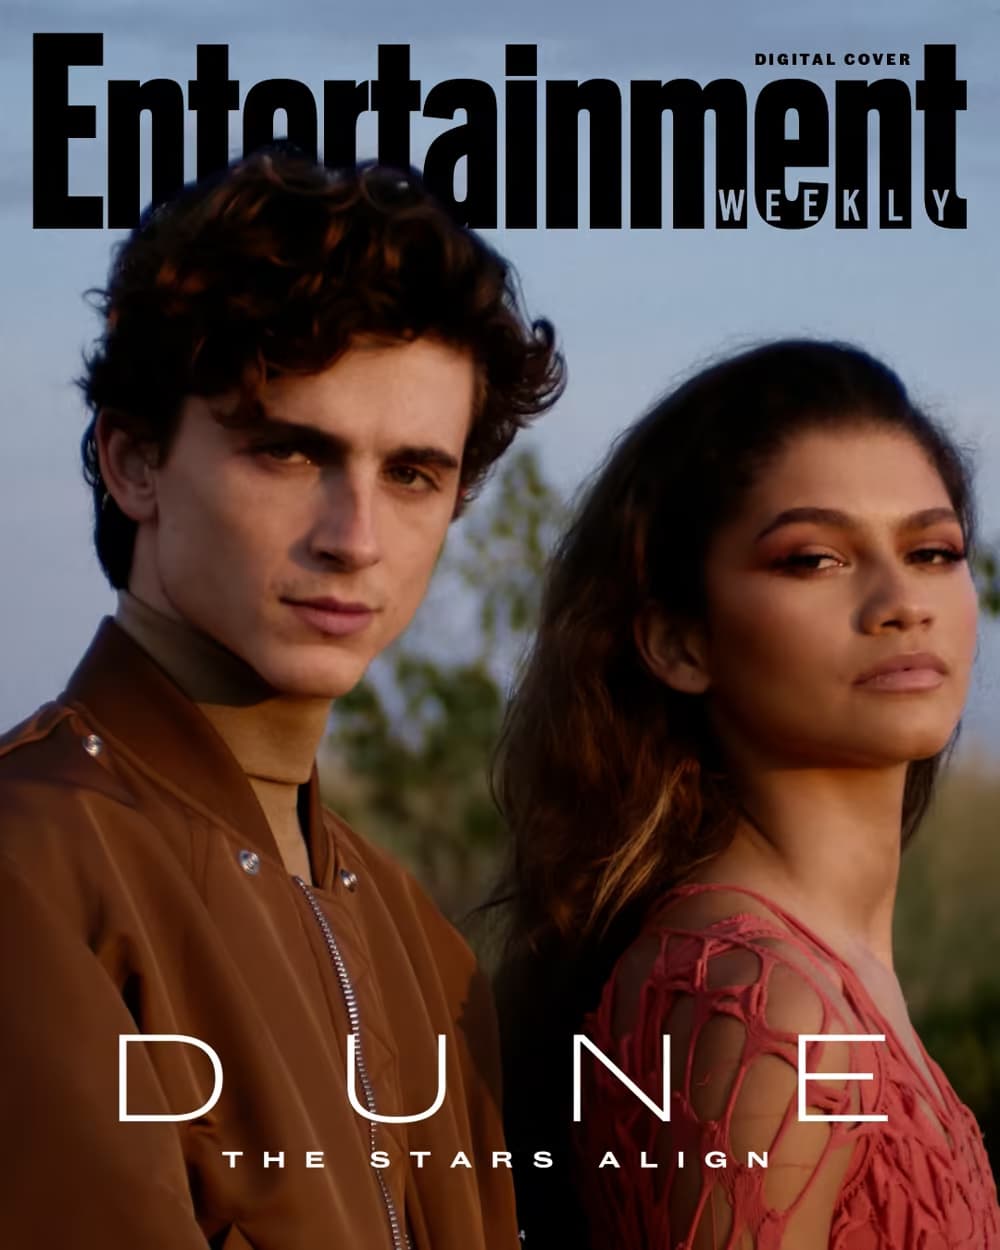 Entertainment Weekly's digital cover shows Timothée Chalamet looking much taller than his "Dune" co-star Zendaya